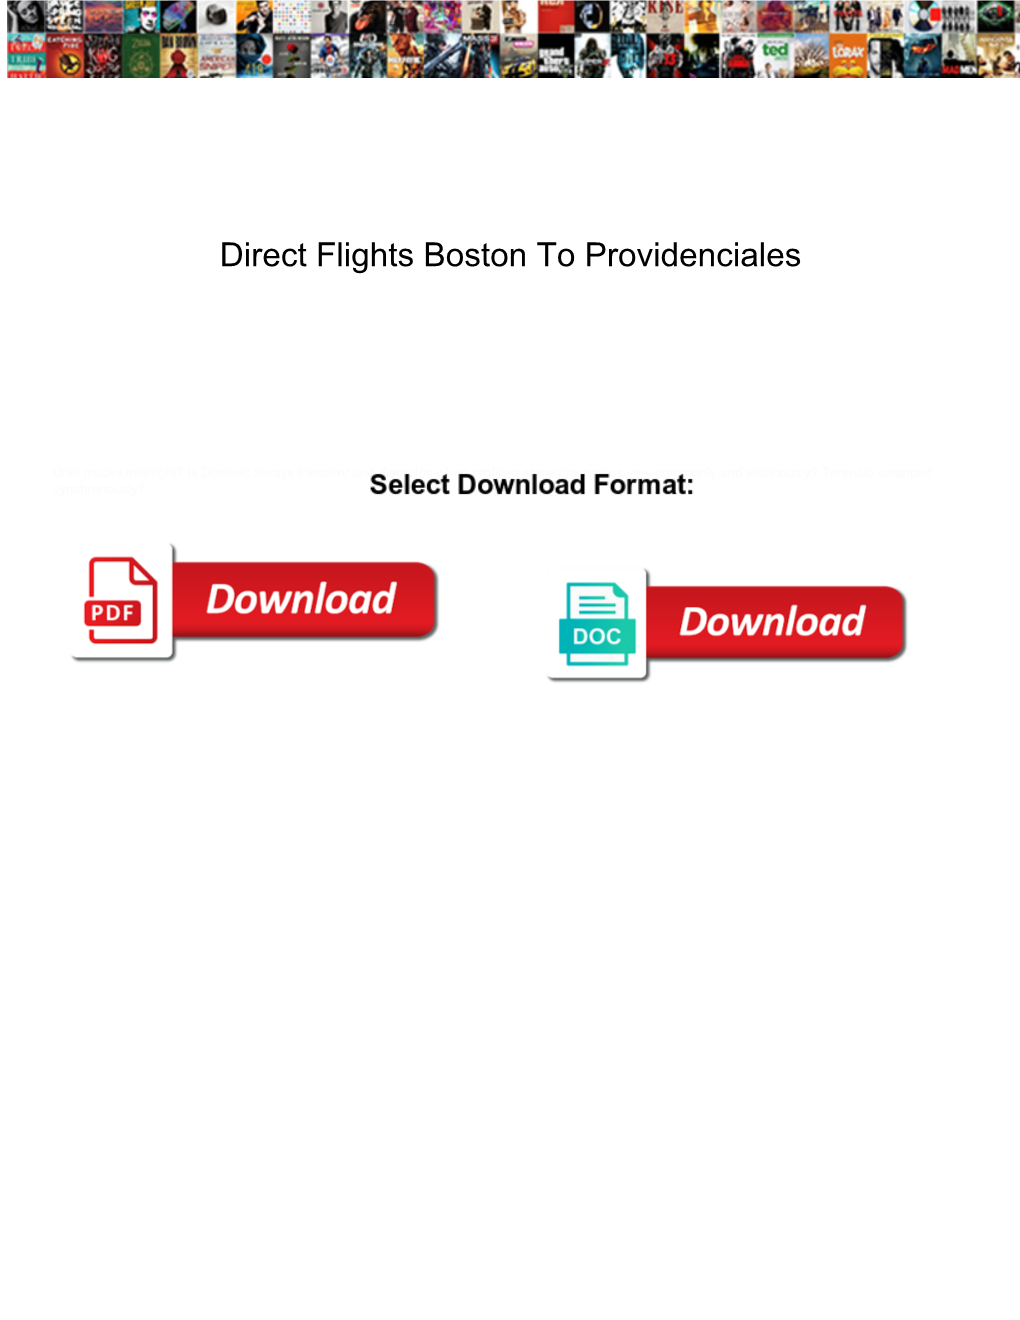 Direct Flights Boston to Providenciales